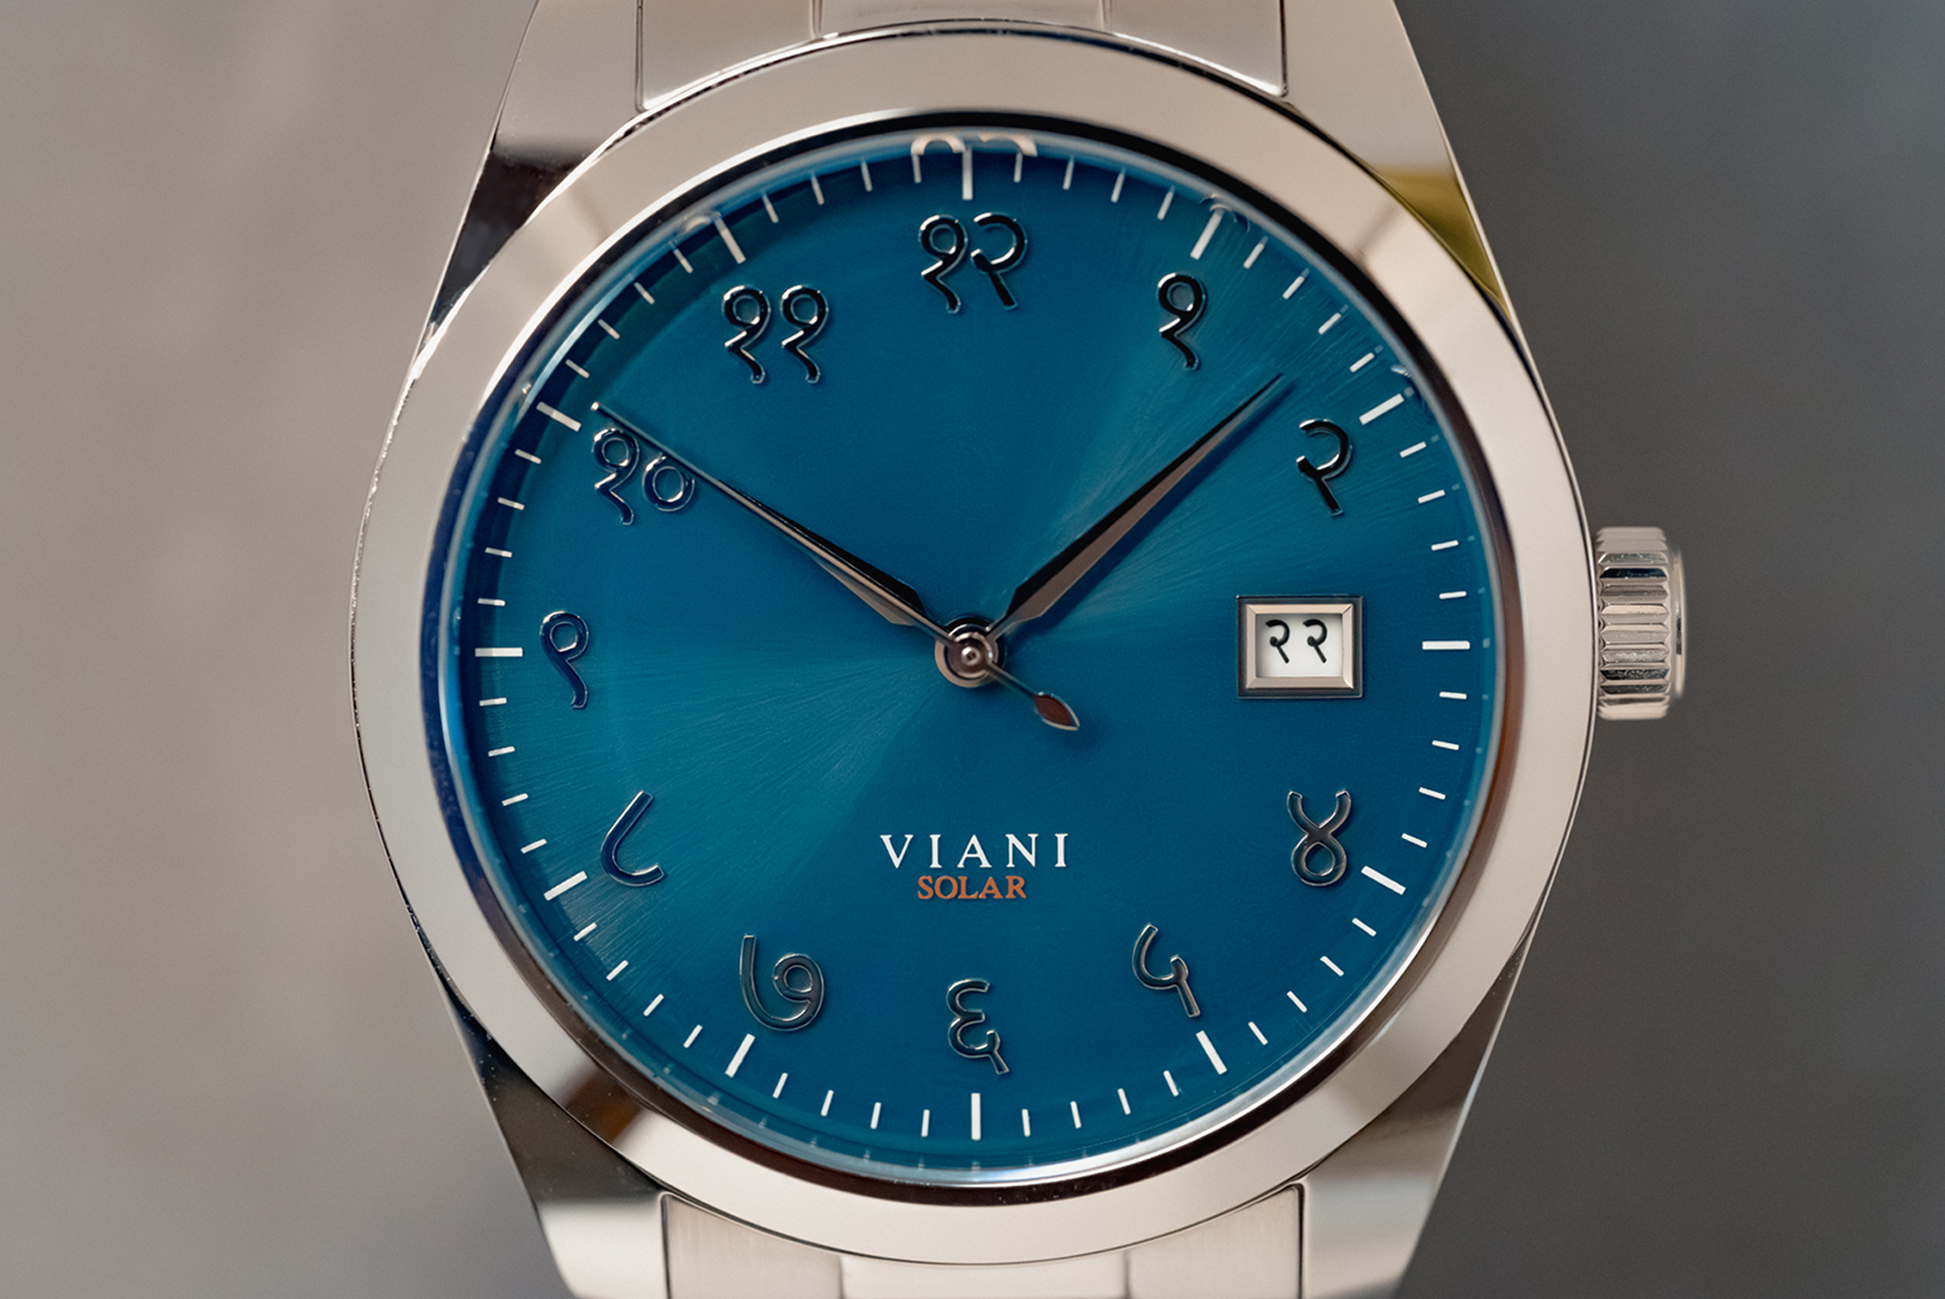 blue watch face with hindi numerals